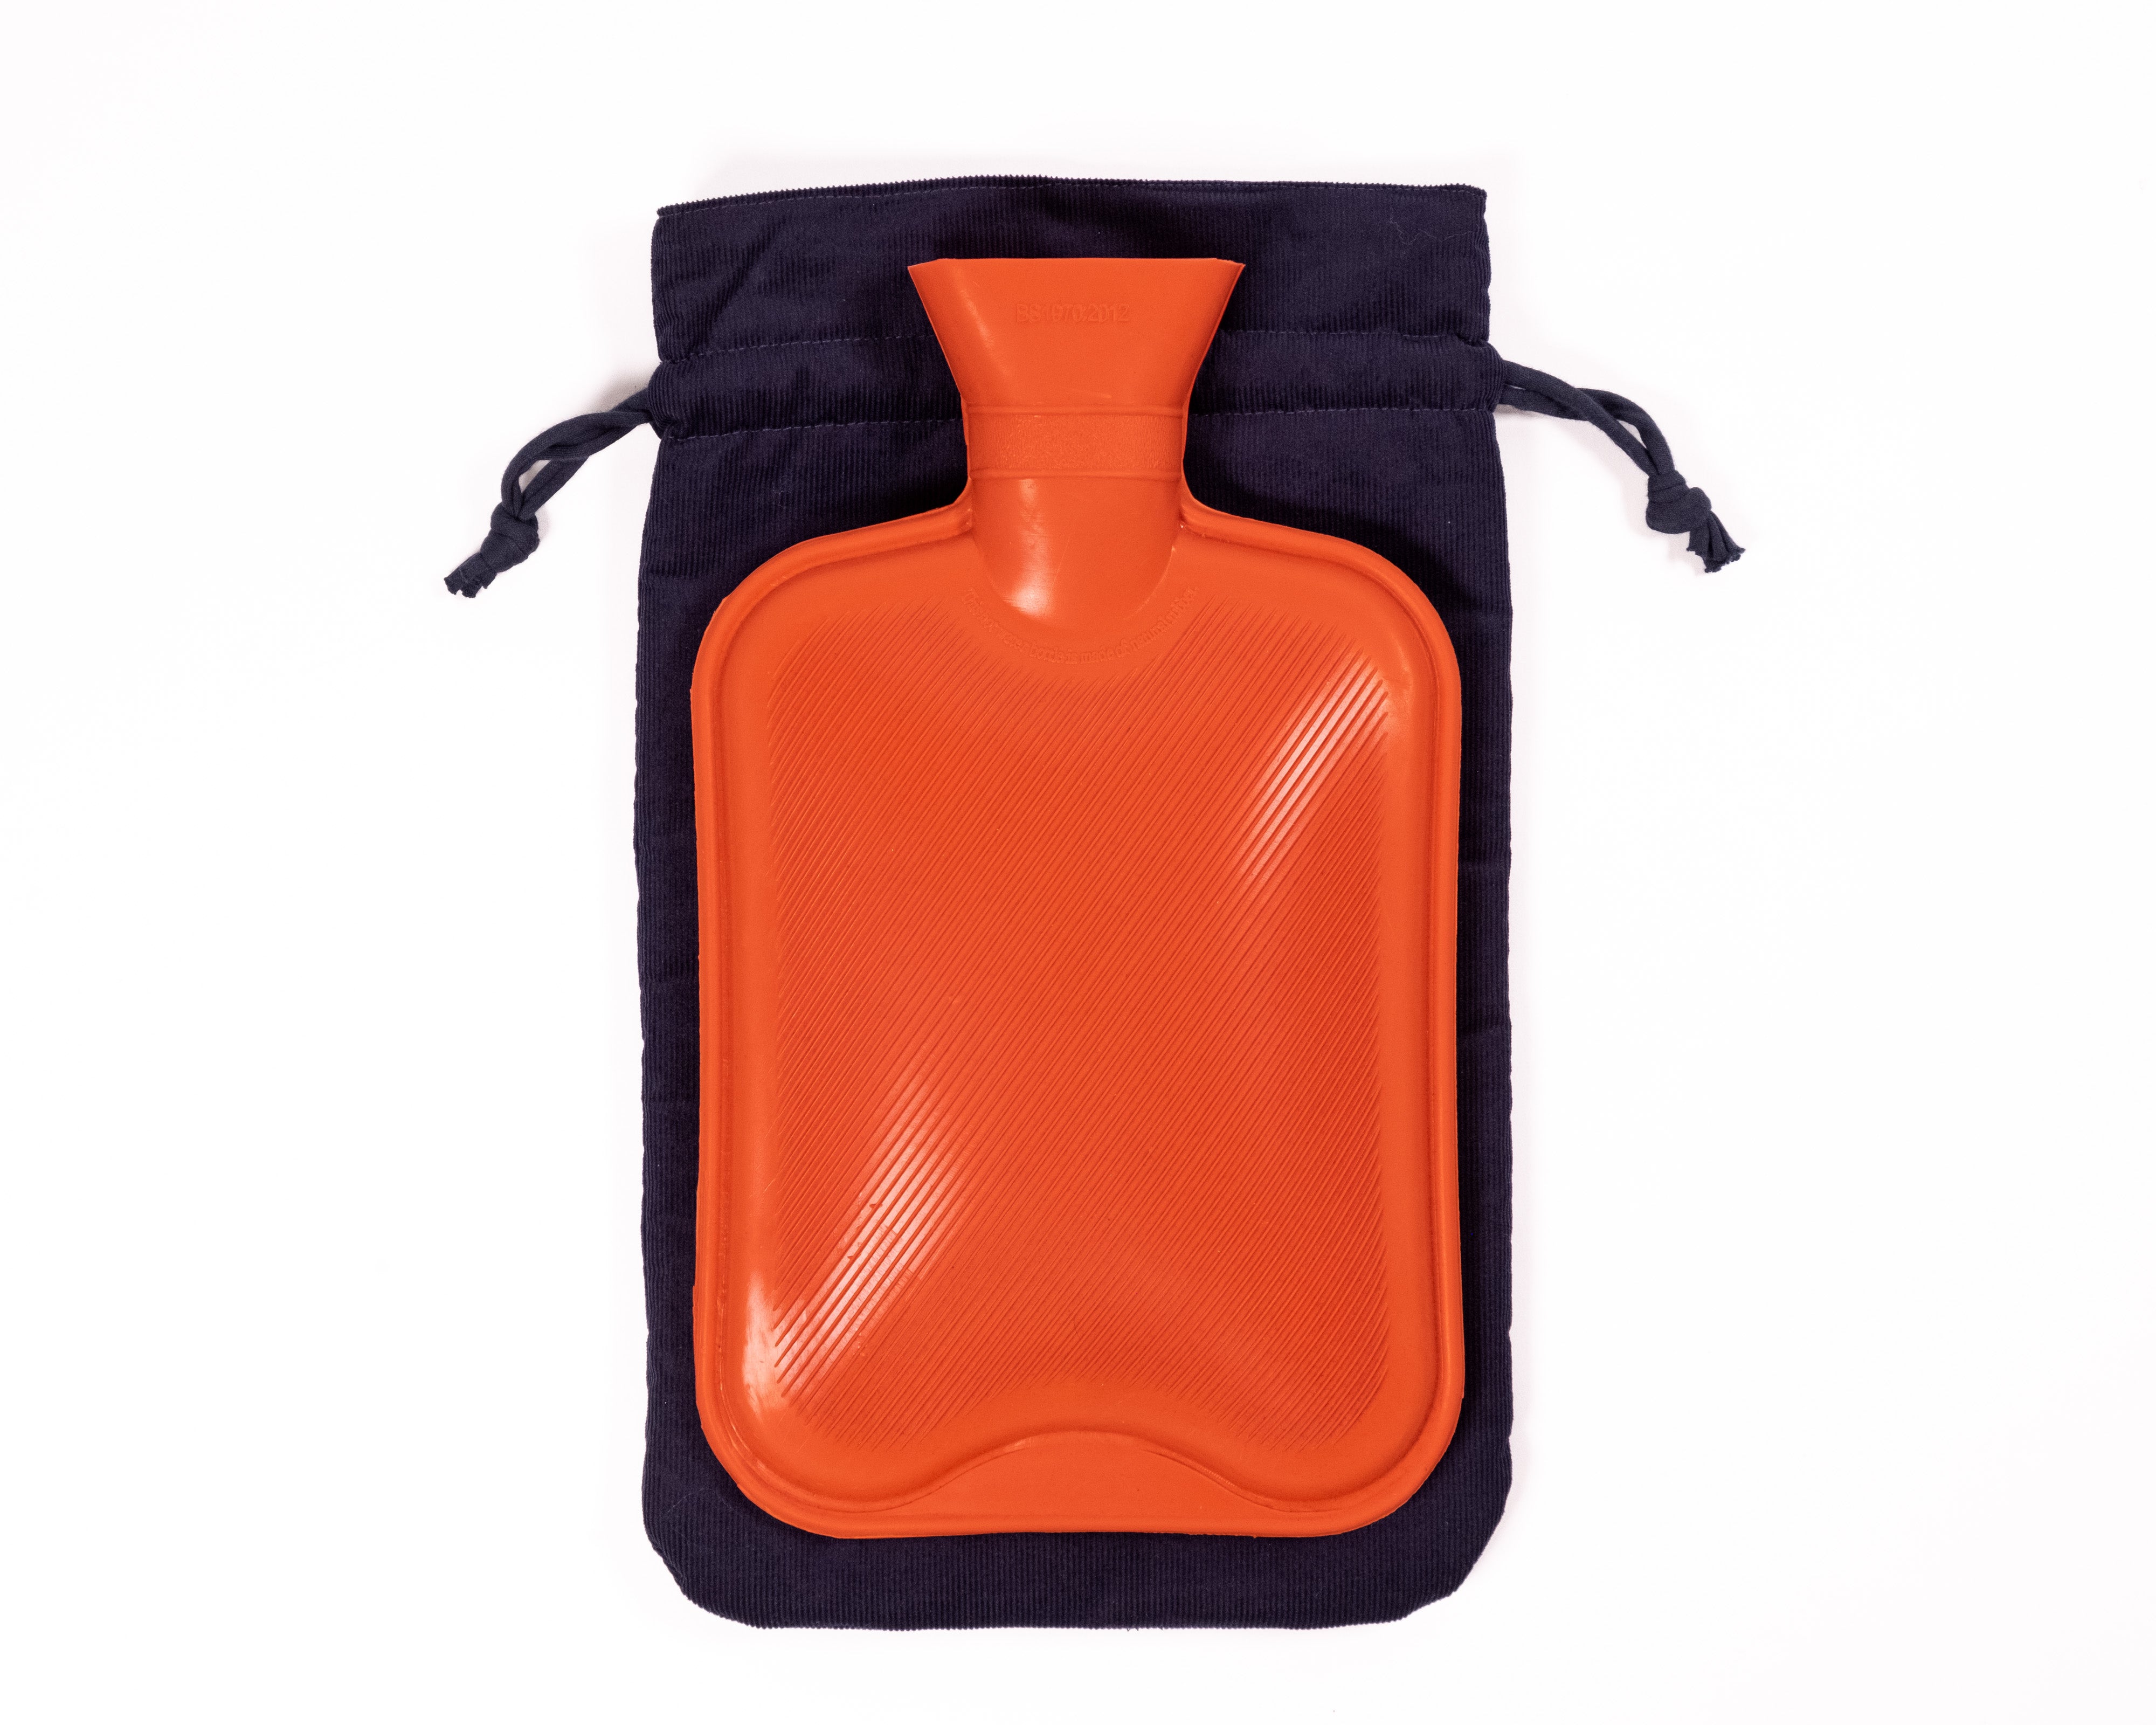 Hot water bottle cover - W002